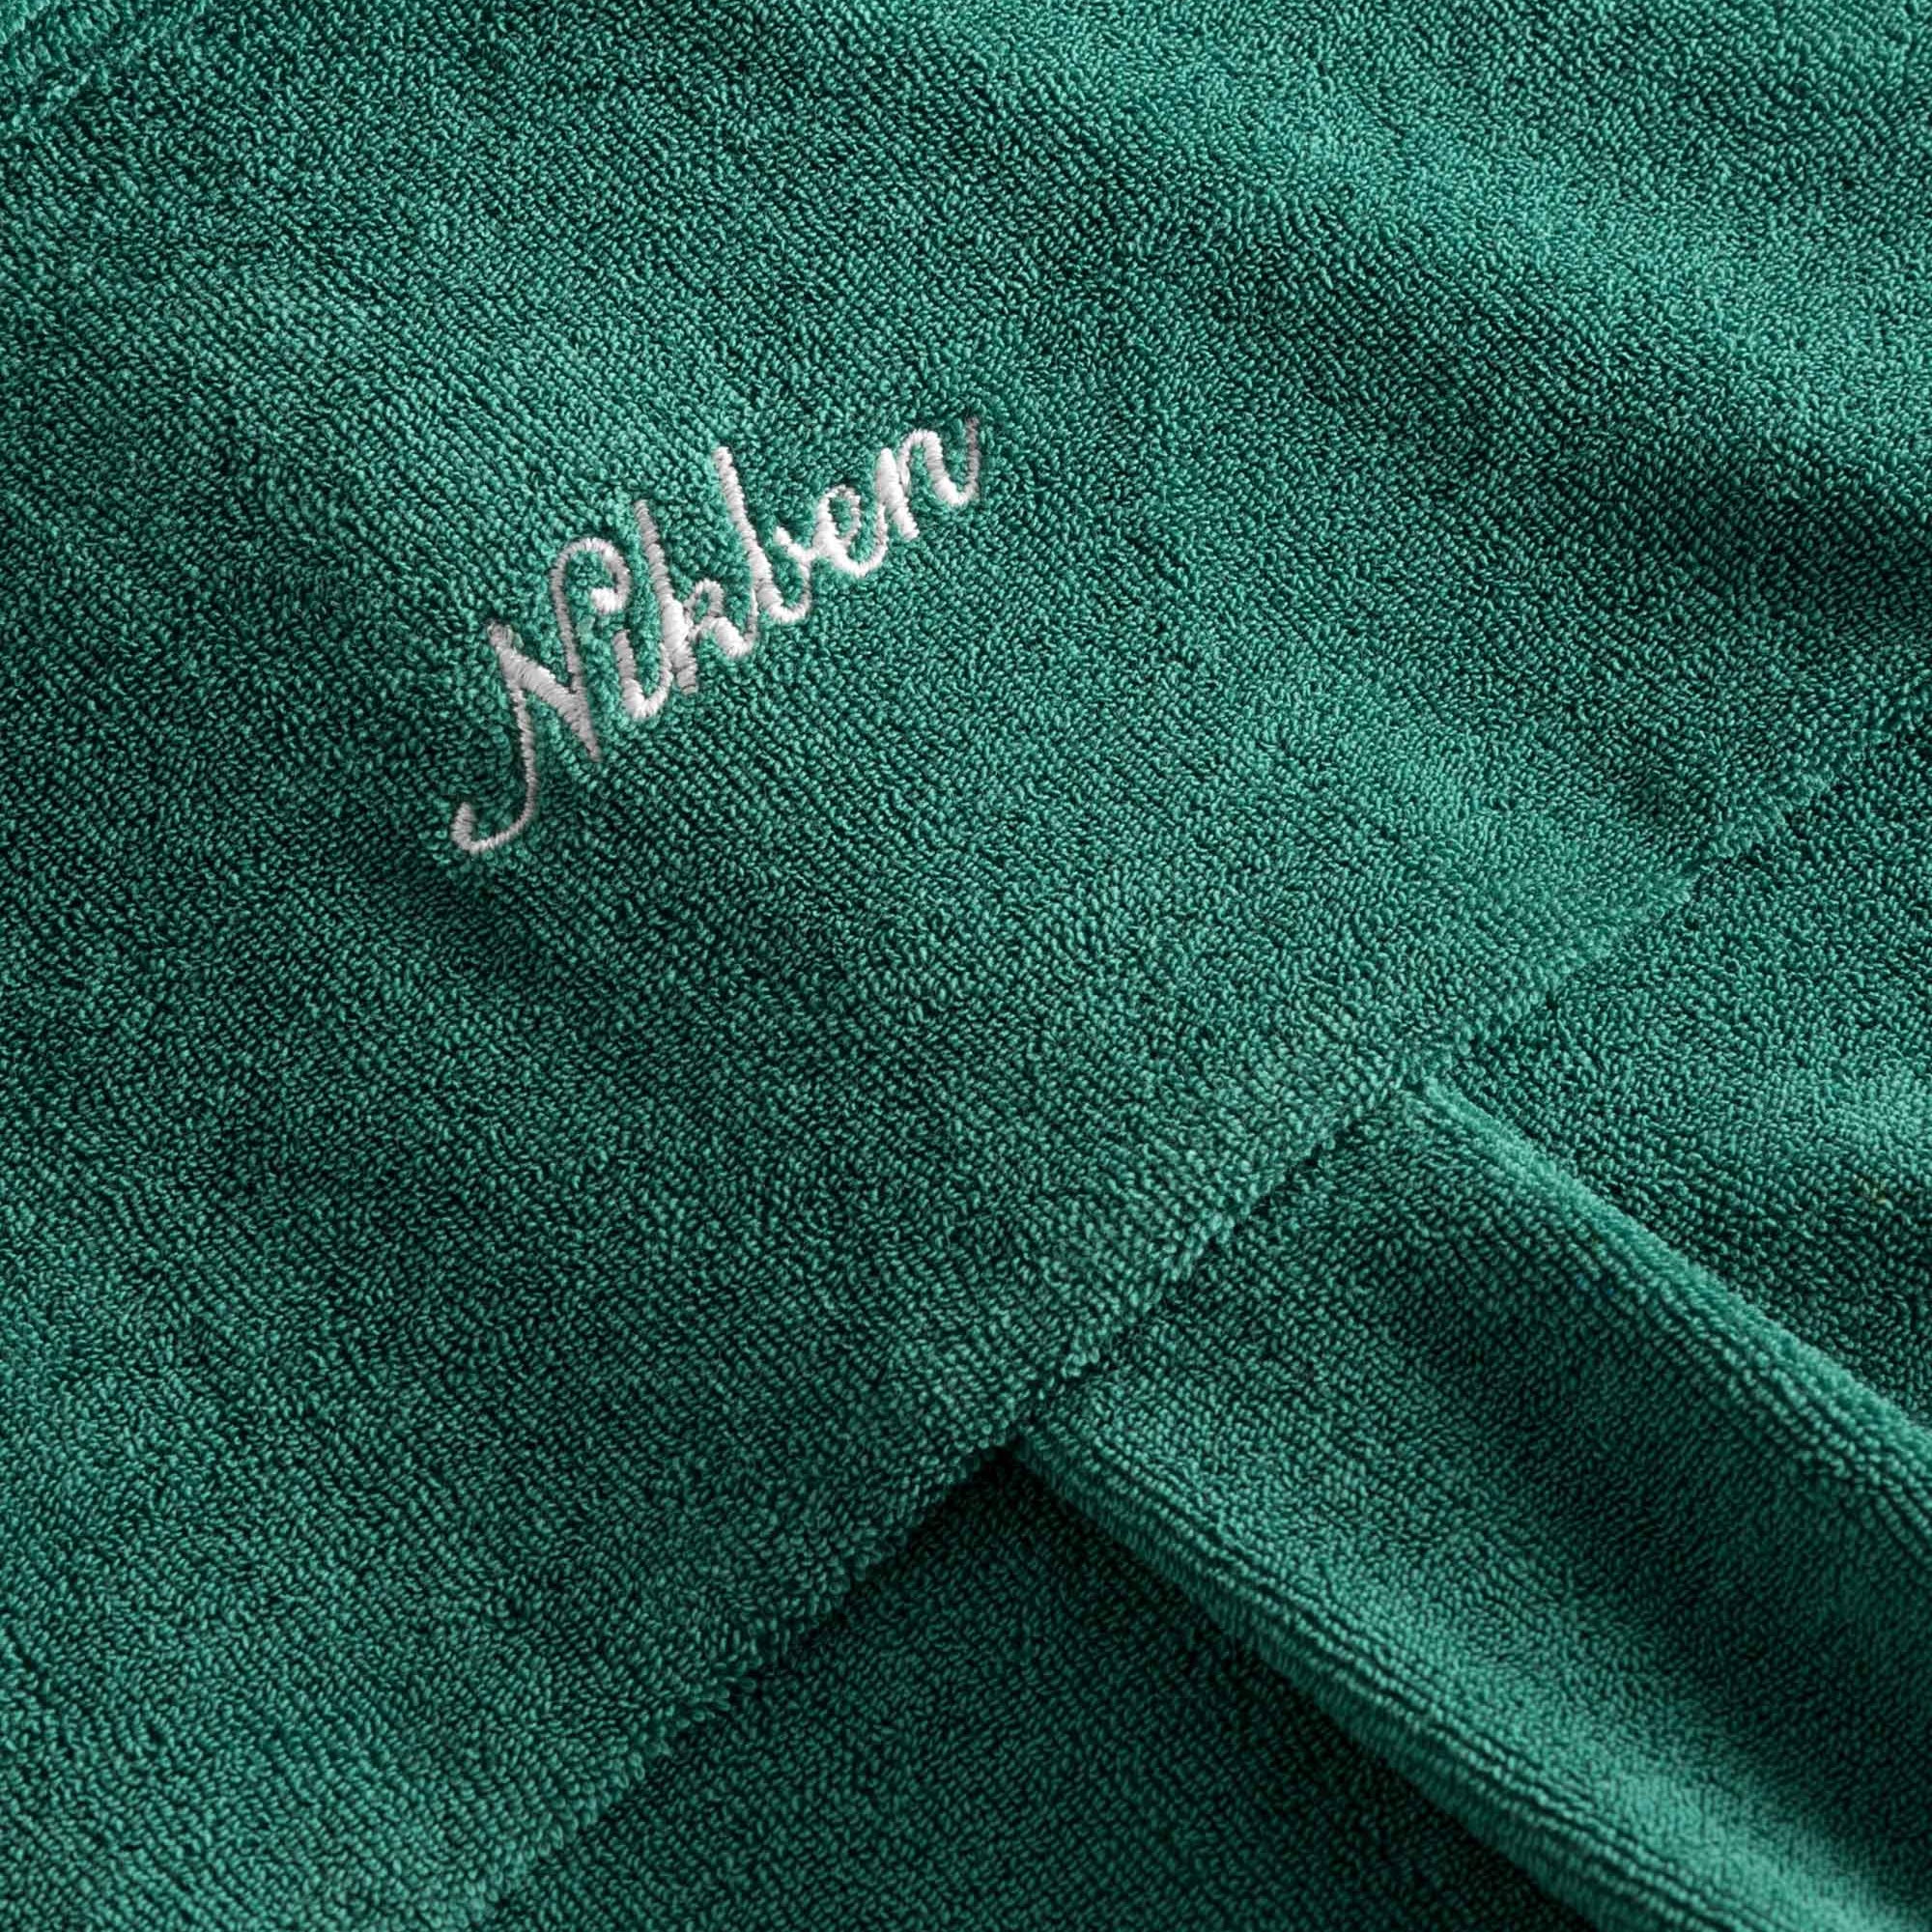 Embroidered logo on a green kaftan in terry toweling fabric.